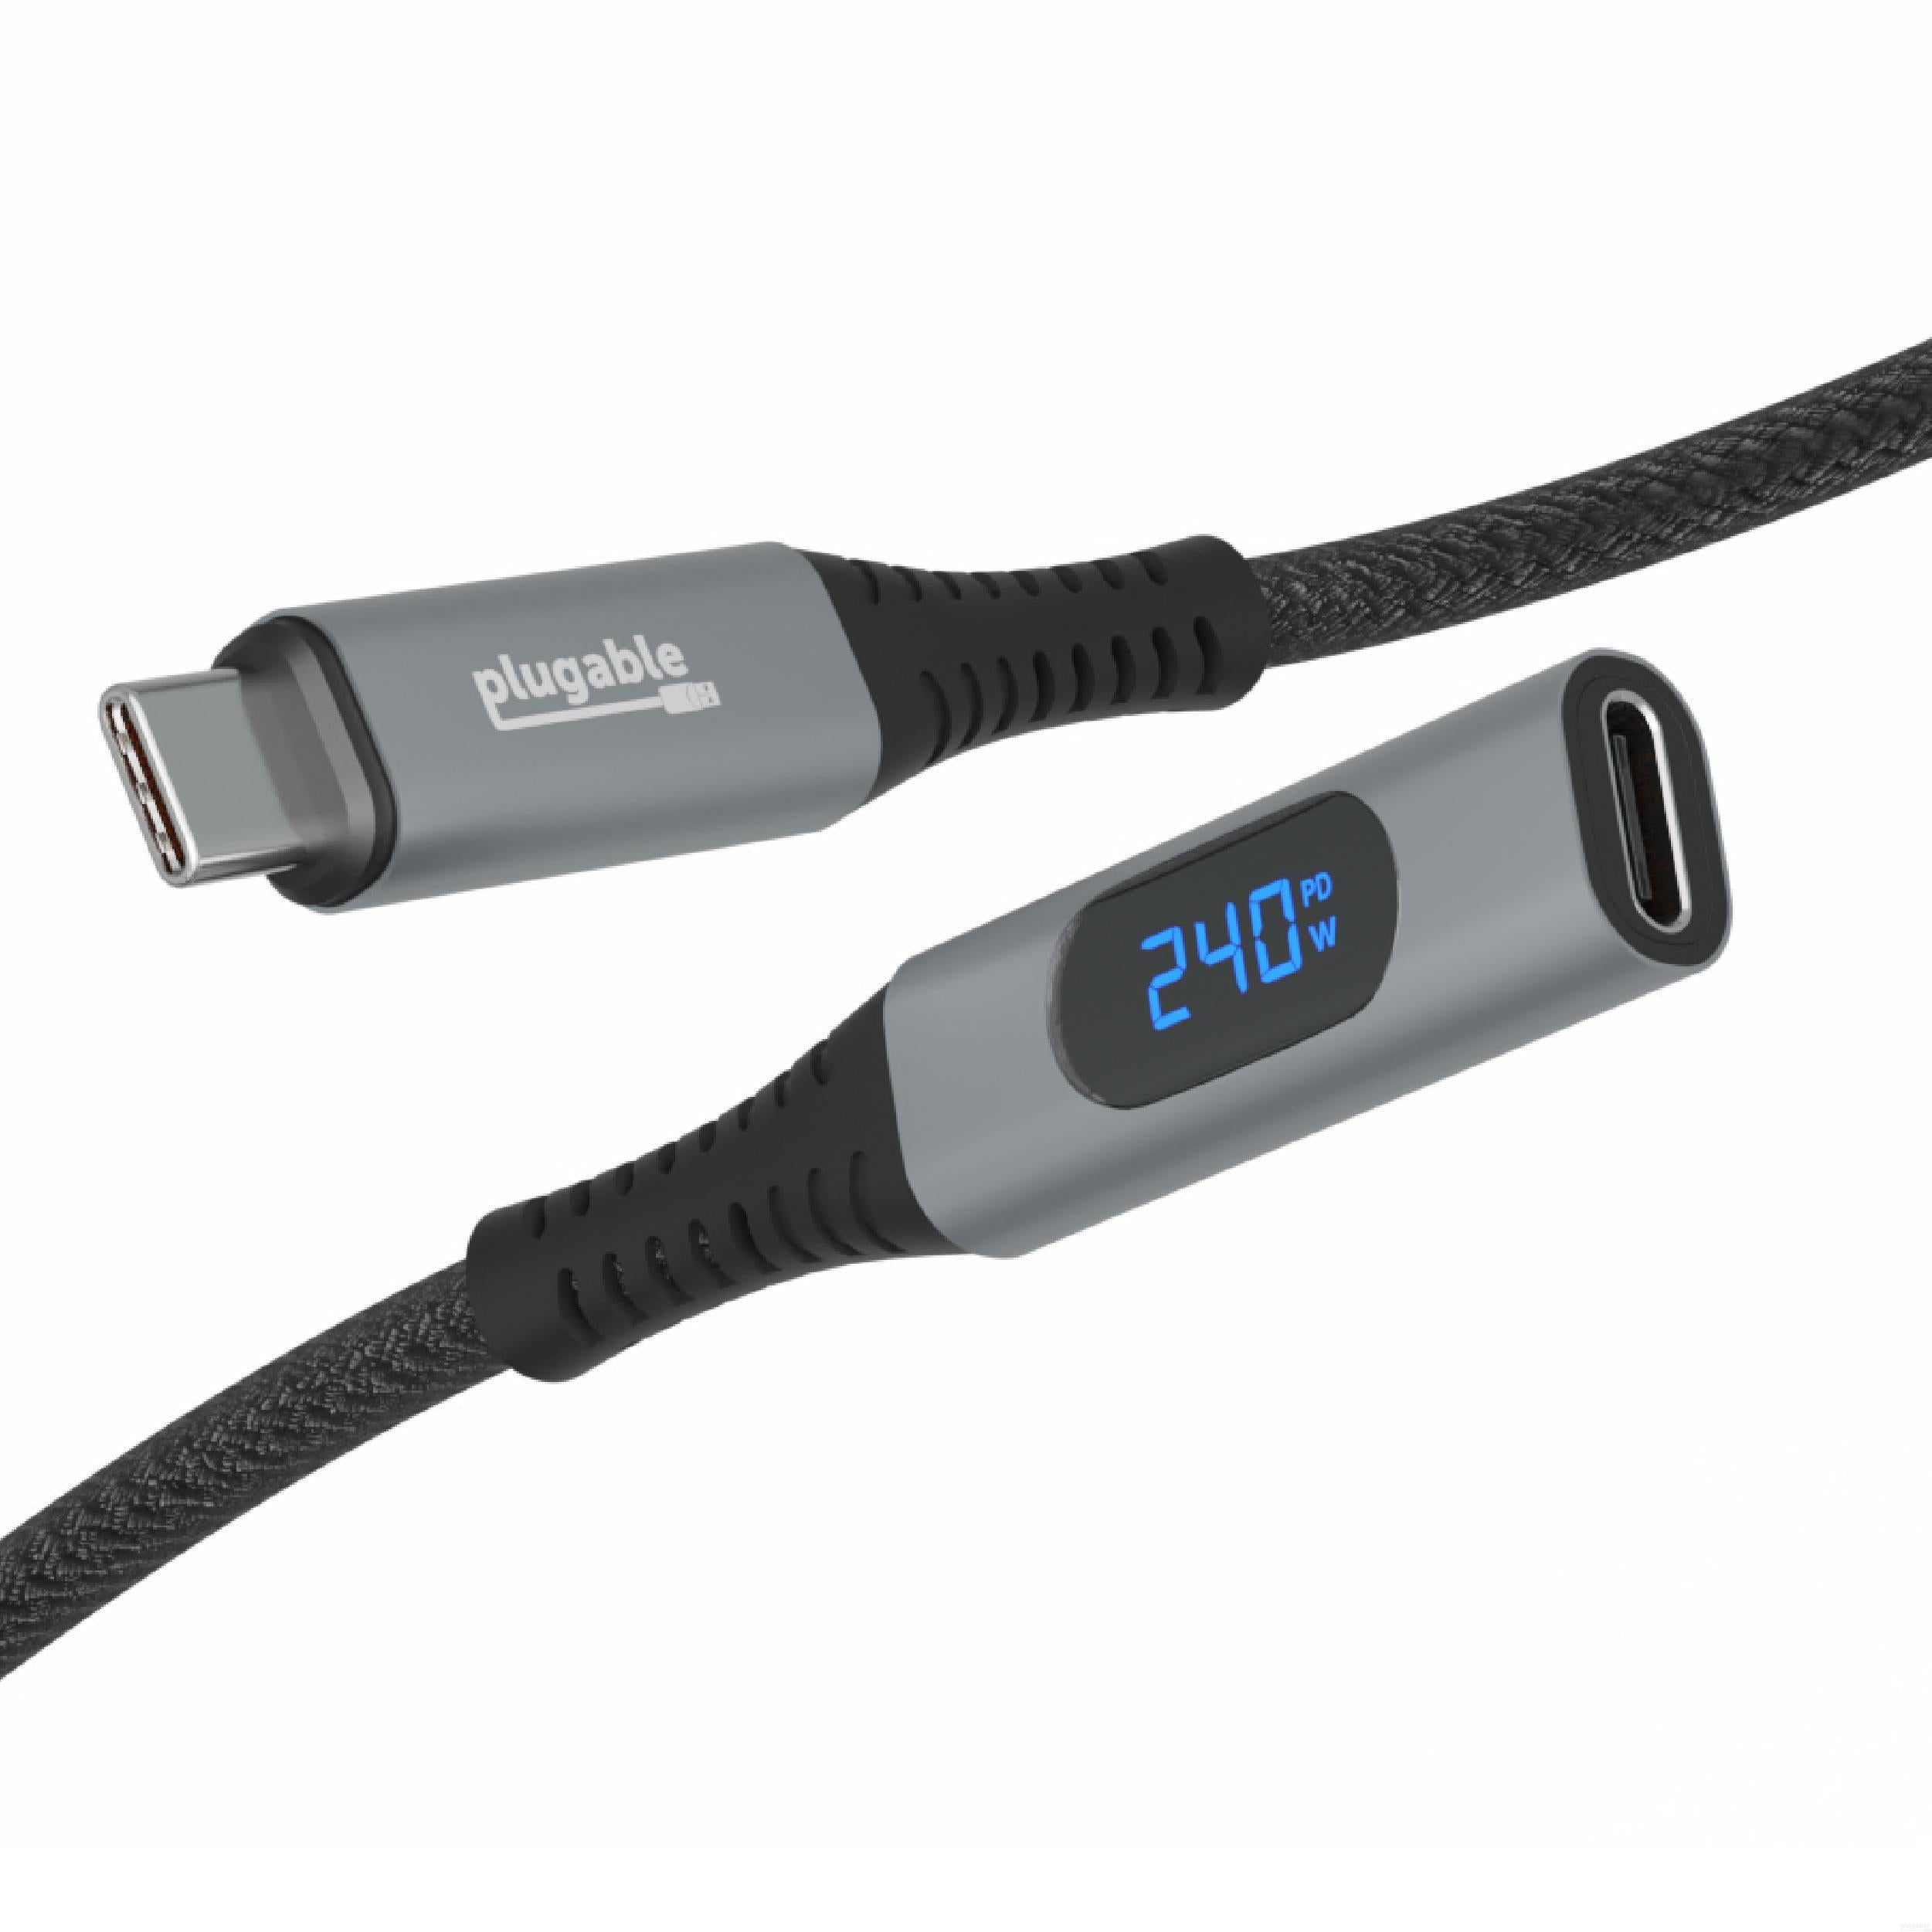 Plugable USB-C Extension Cable with Built-In Multimeter Tester, Fast C